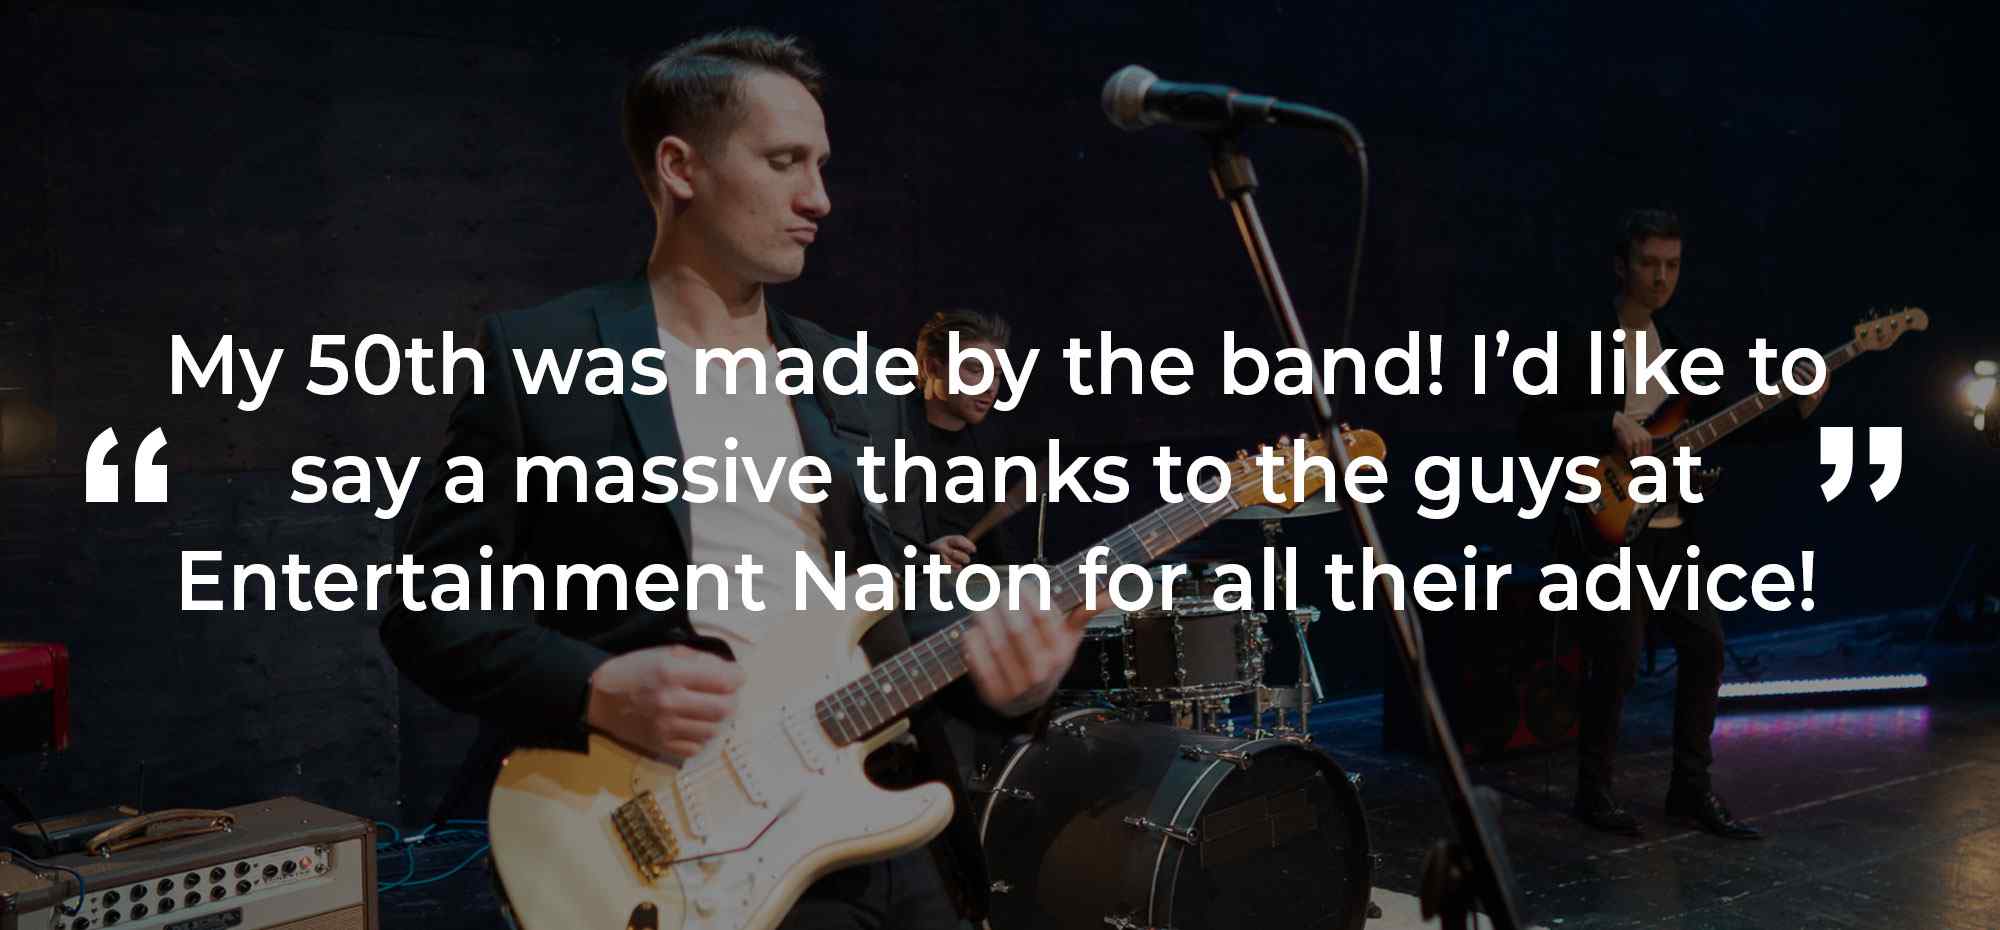 Client Review of a Party Band Worldwide